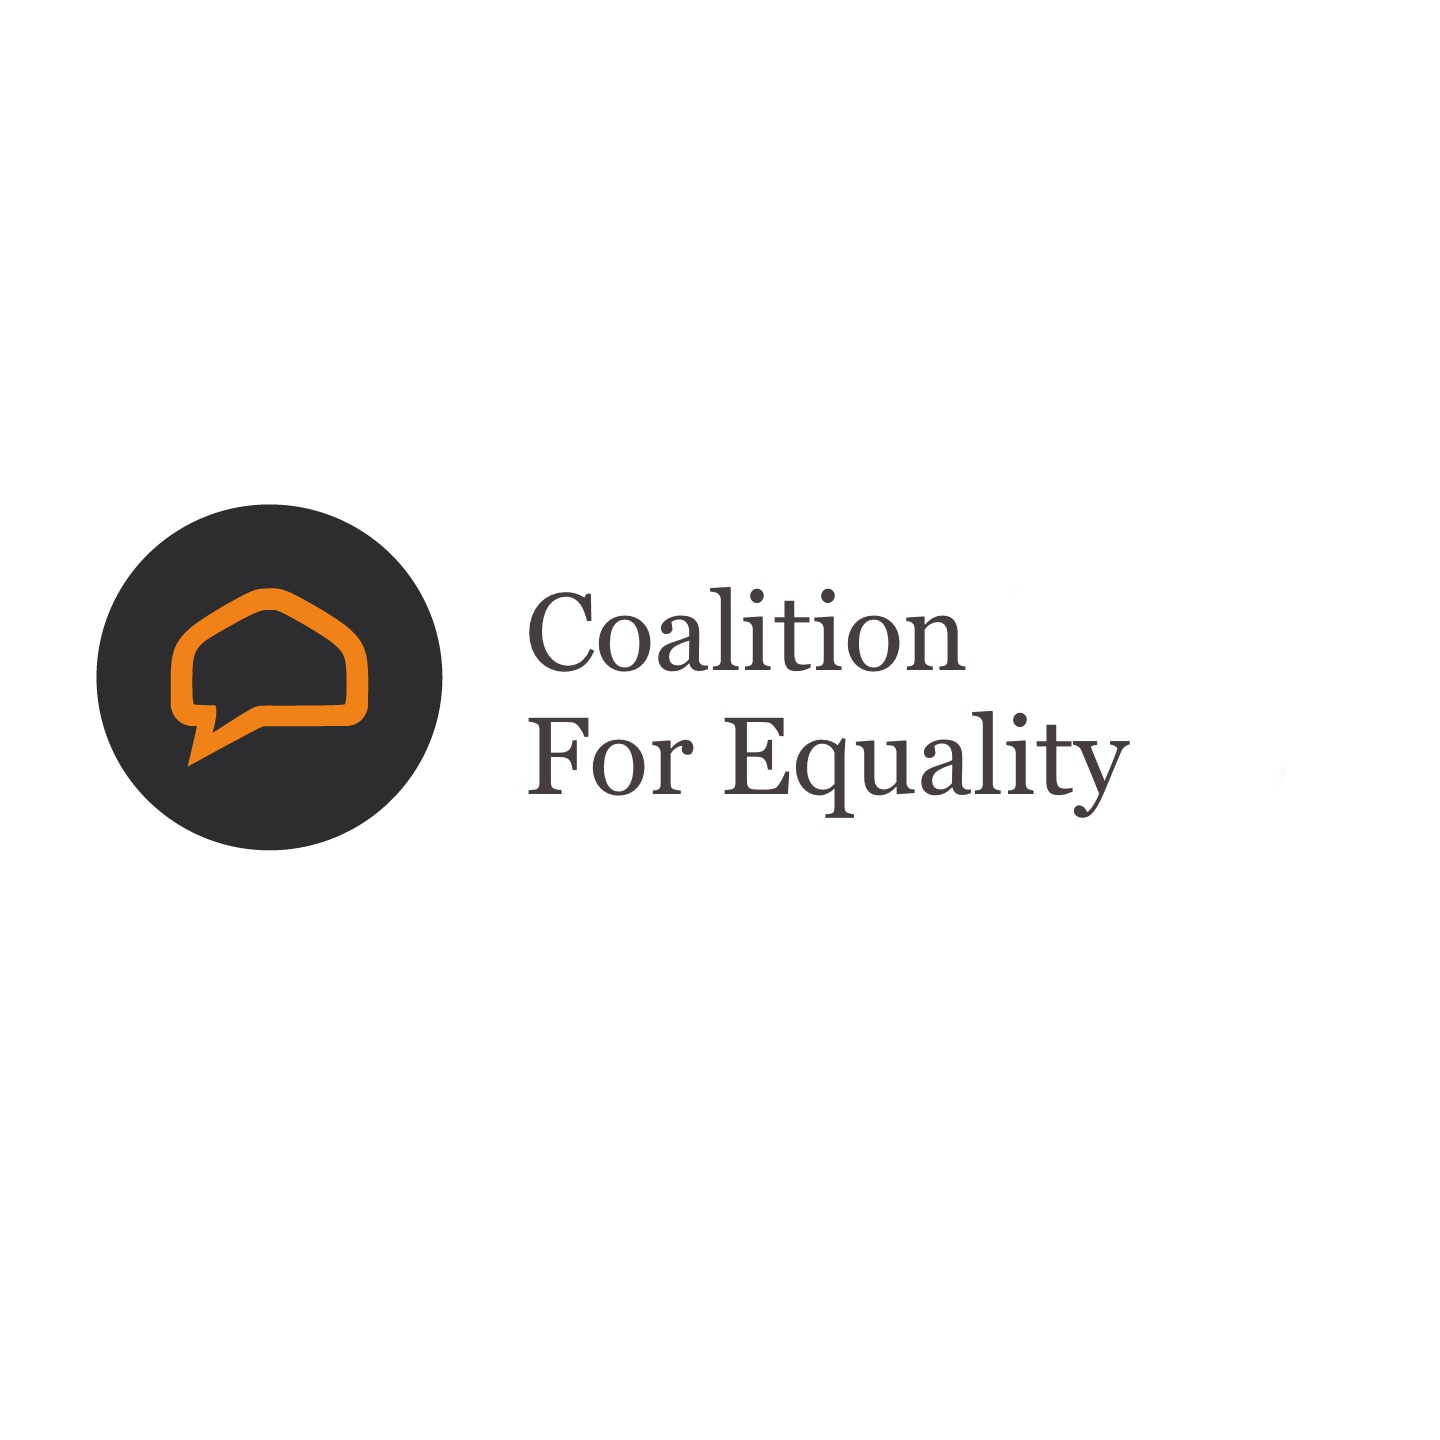 We, are the members of the Coalition for equality, express our deep worries regarding the latest actions of the national authorities against civic society on pressure of the freedom of expres